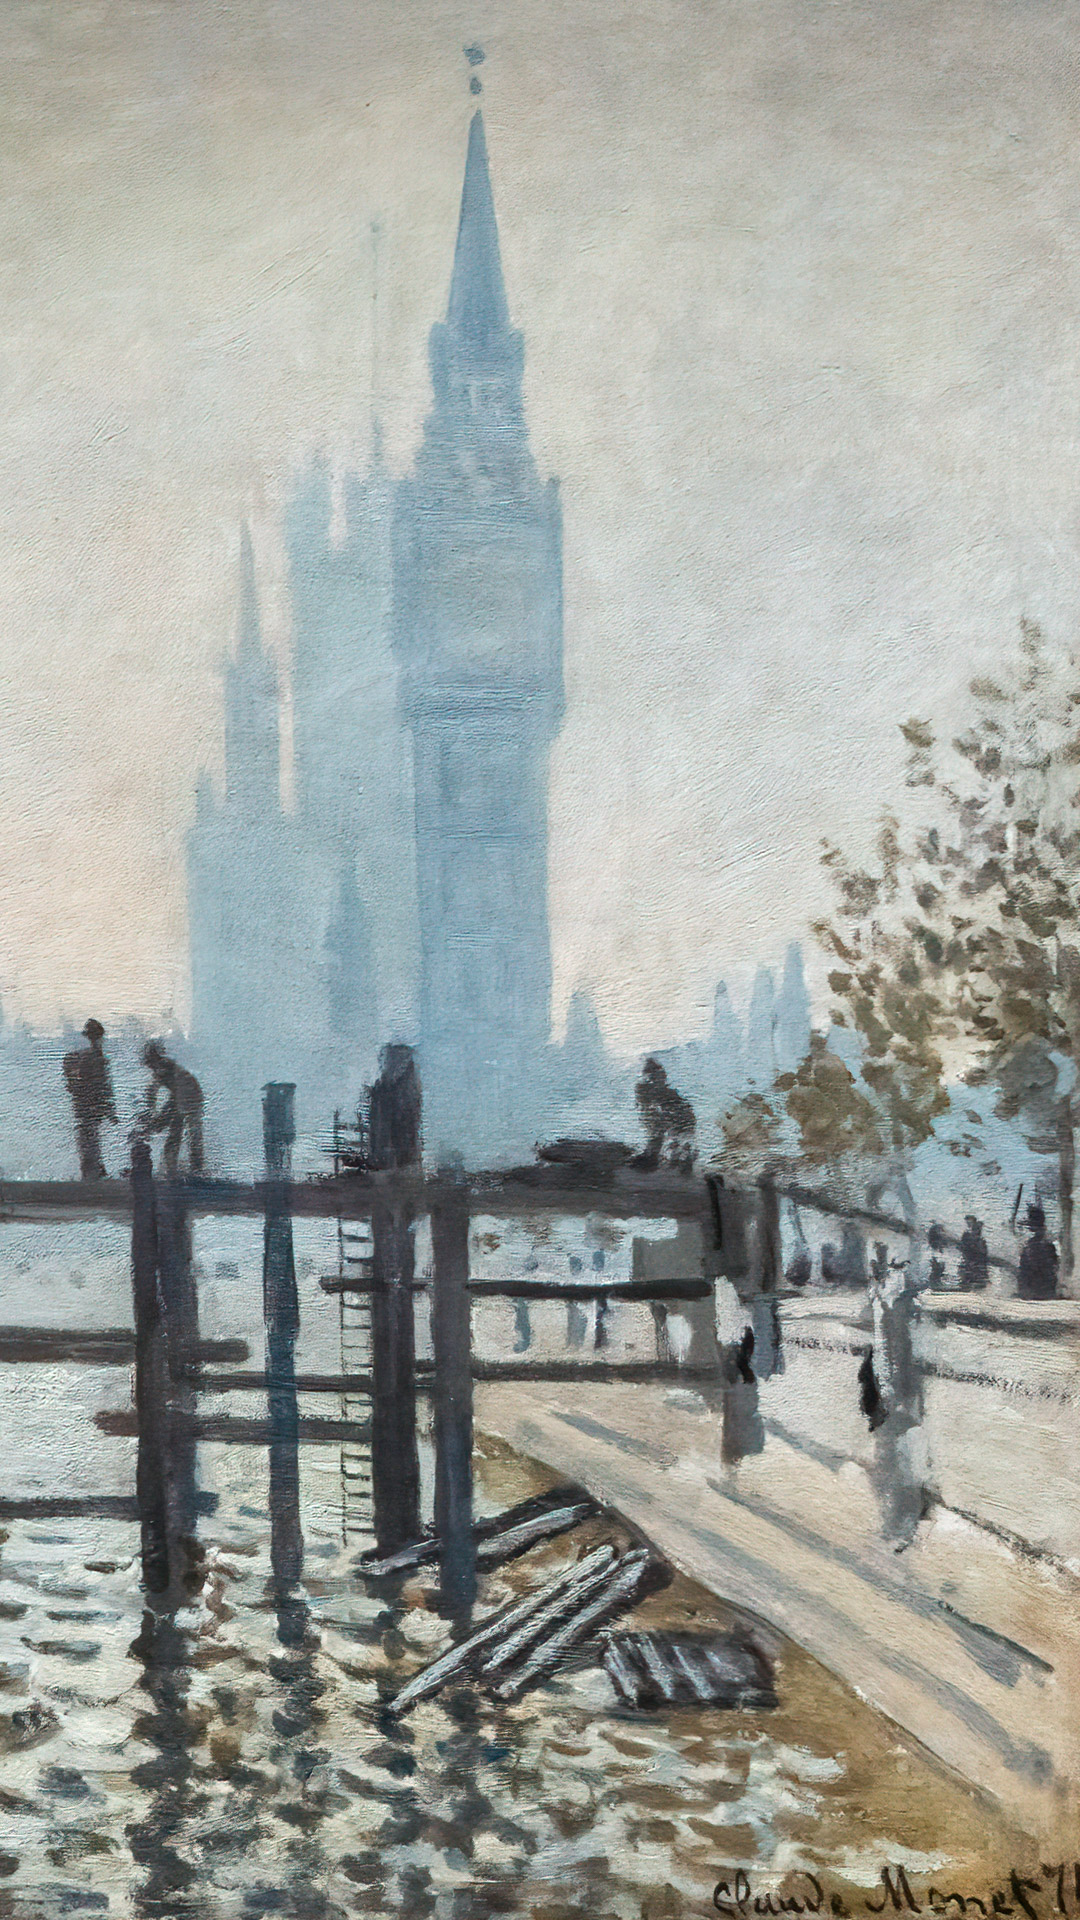 Capture the essence of Monet's London painting on your iPhone with our captivating wallpaper.